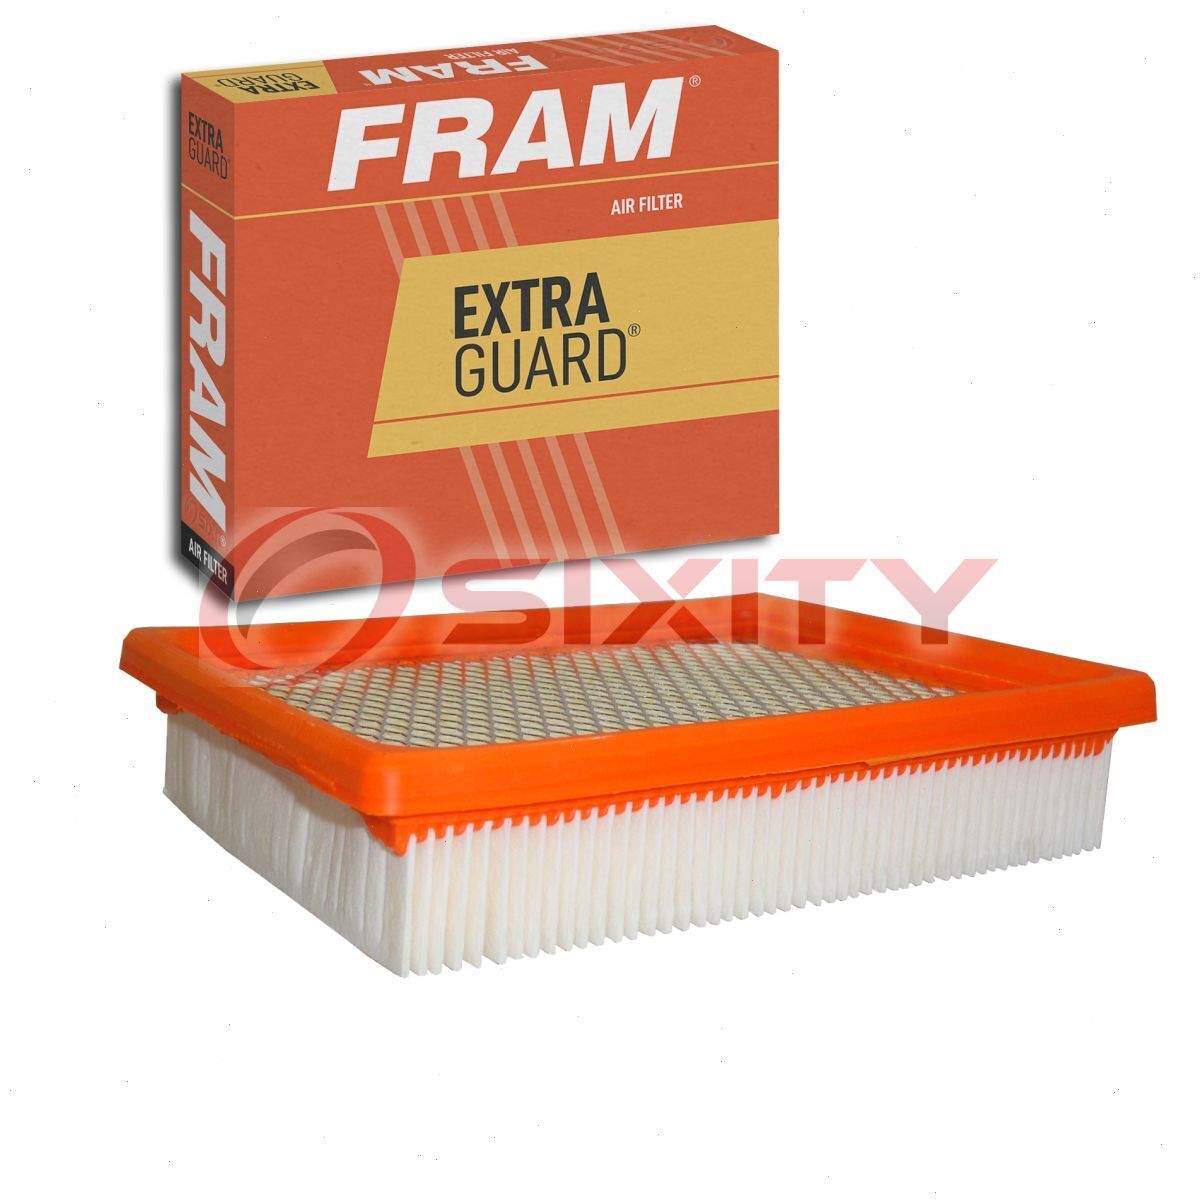 FRAM Extra Guard Air Filter for 1990-1993 Chevrolet Beretta Intake Inlet ly